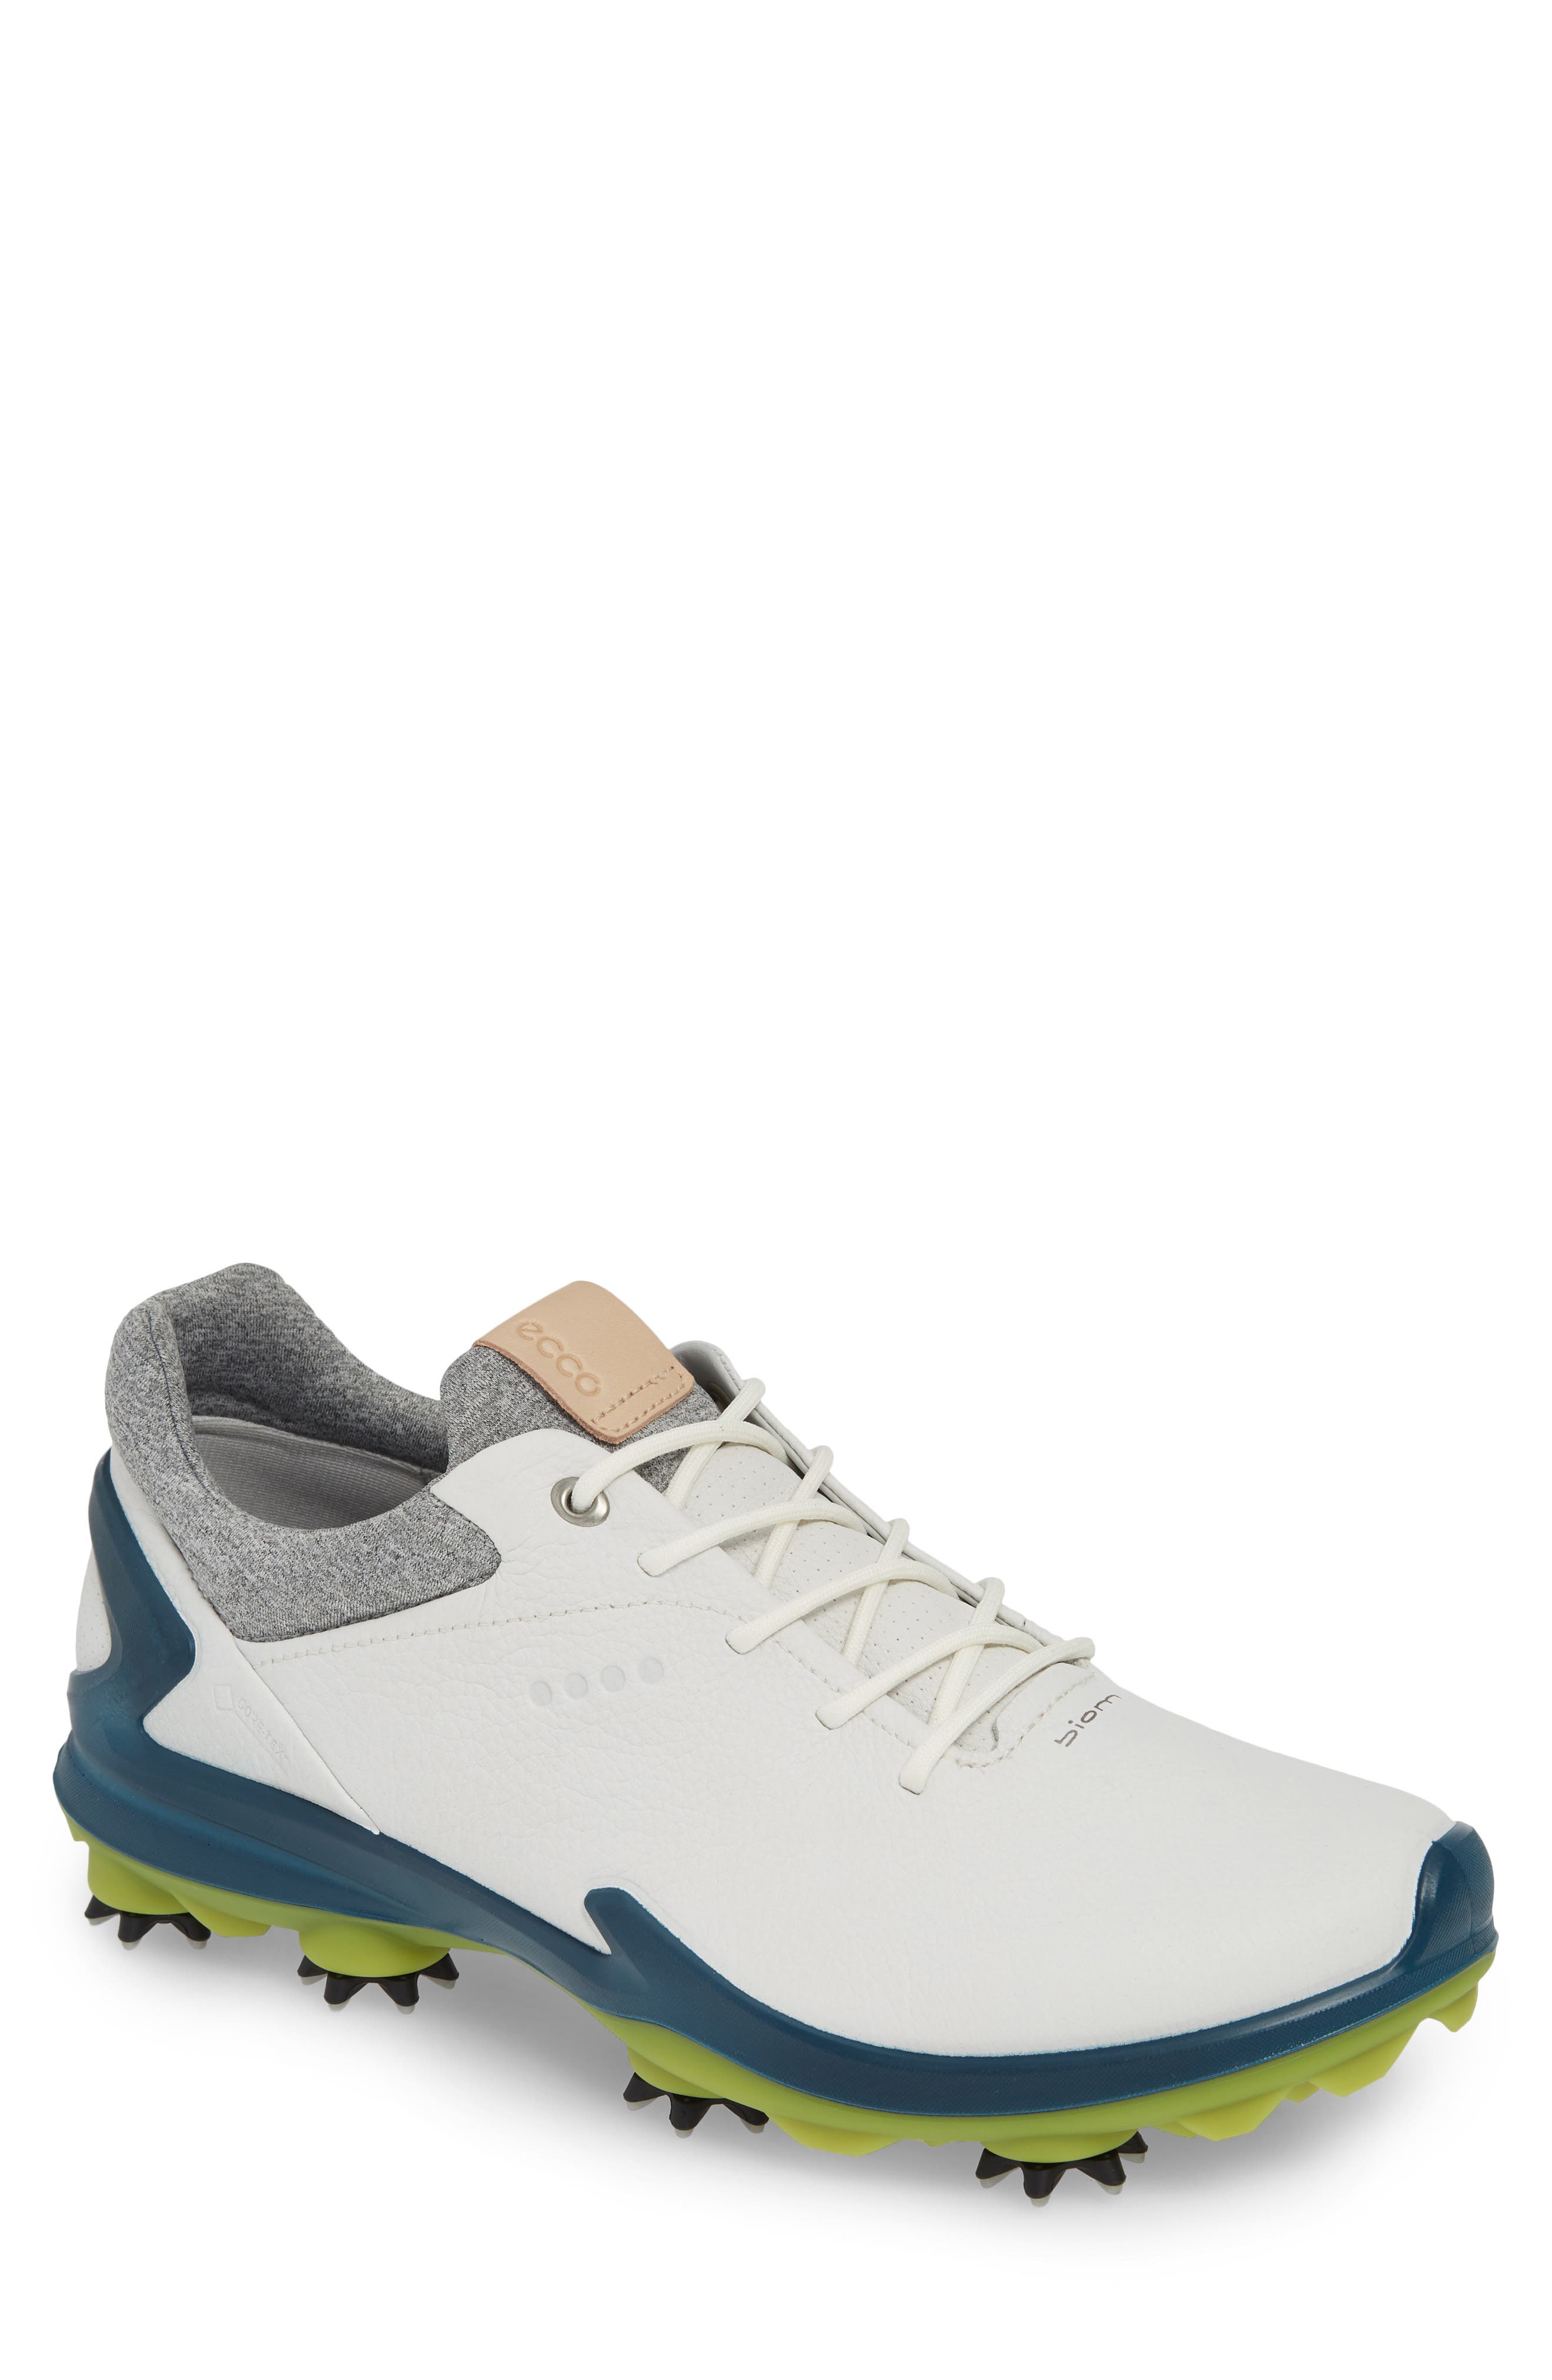 Men's Arch Support Golf Shoes | Nordstrom